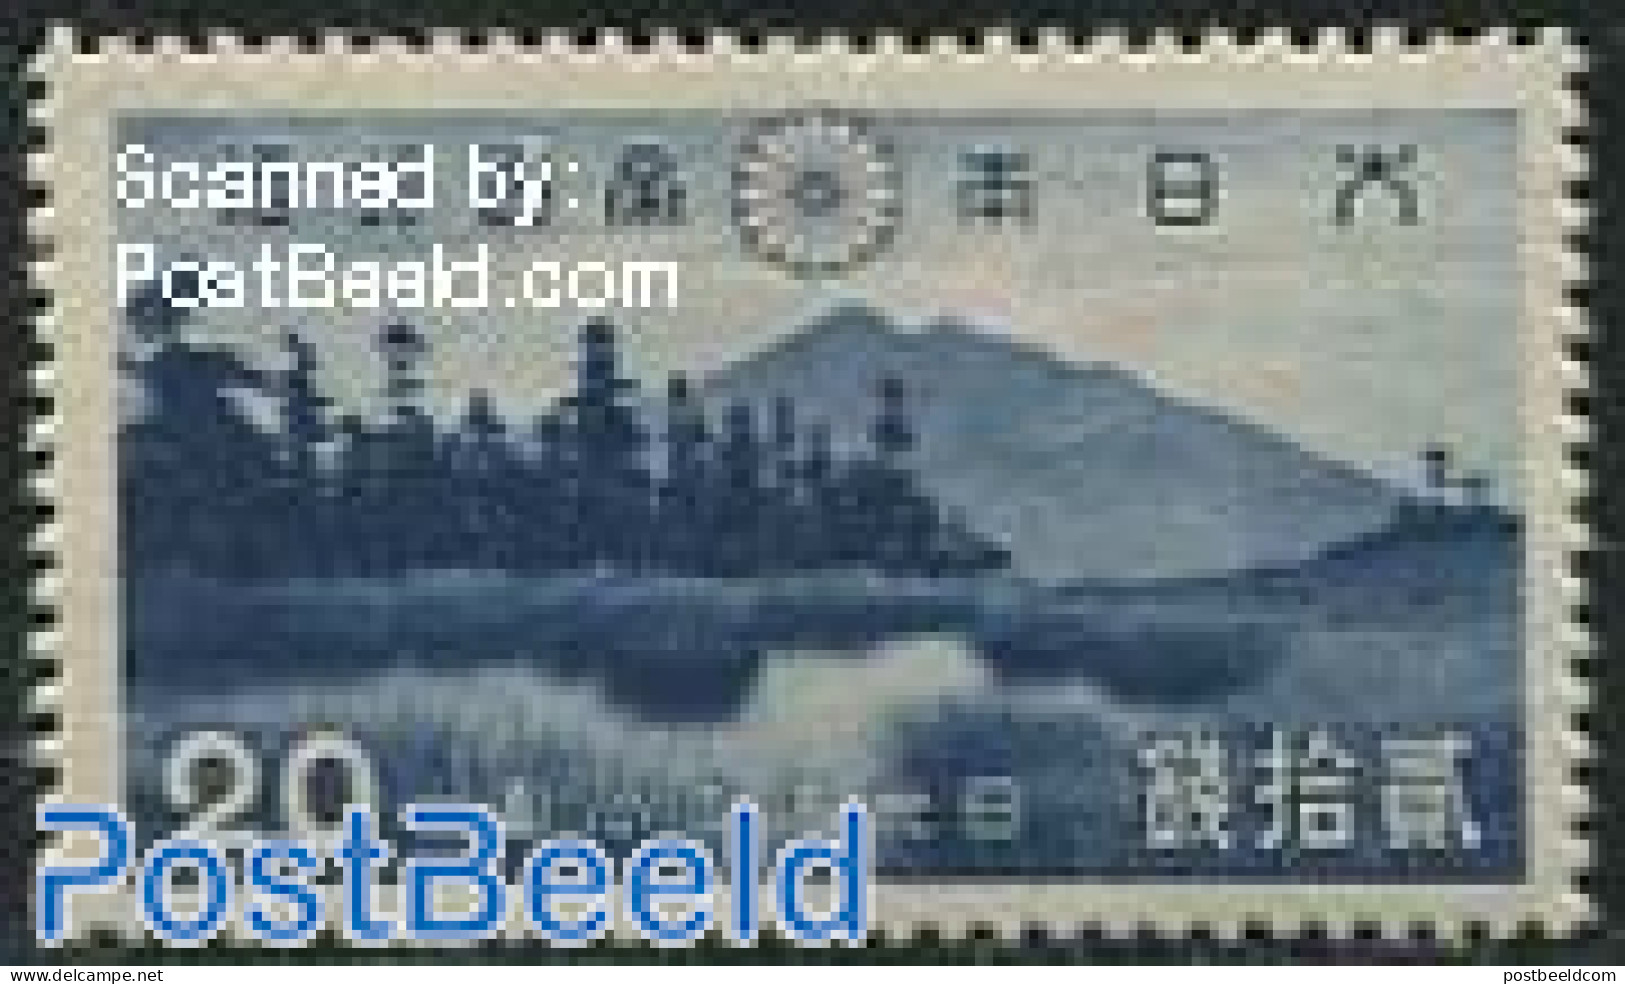 Japan 1938 20S, Stamp Out Of Set, Mint NH - Ungebraucht